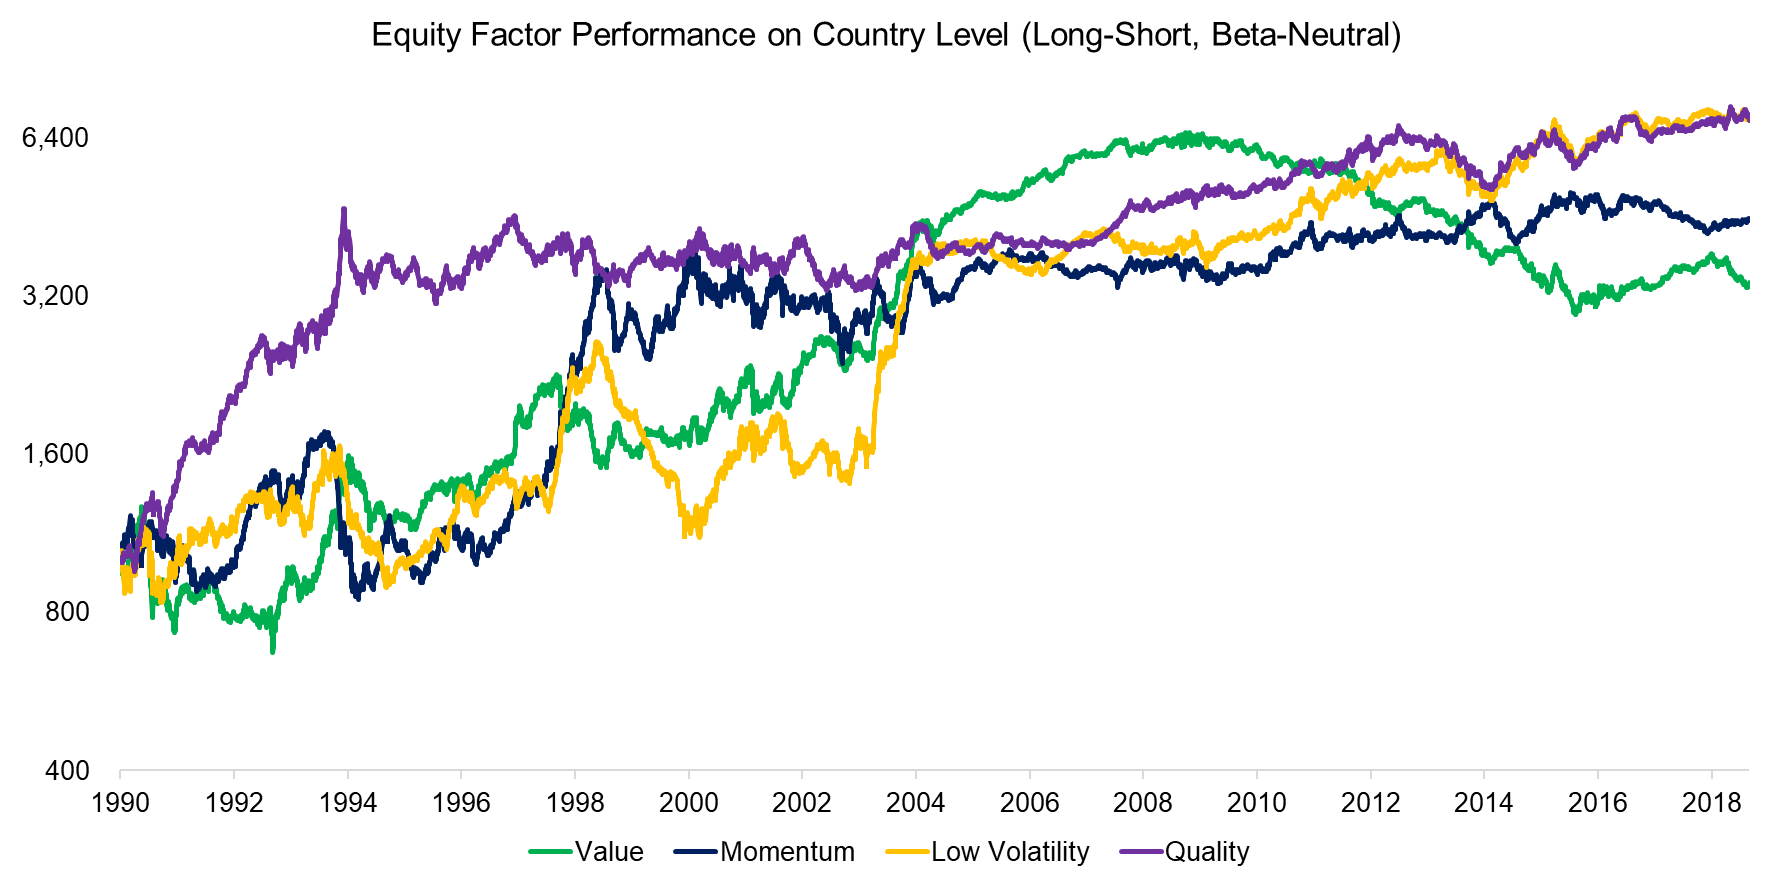 Equity Factor Performance on Country Level (Long-Short, Beta-Neutral)